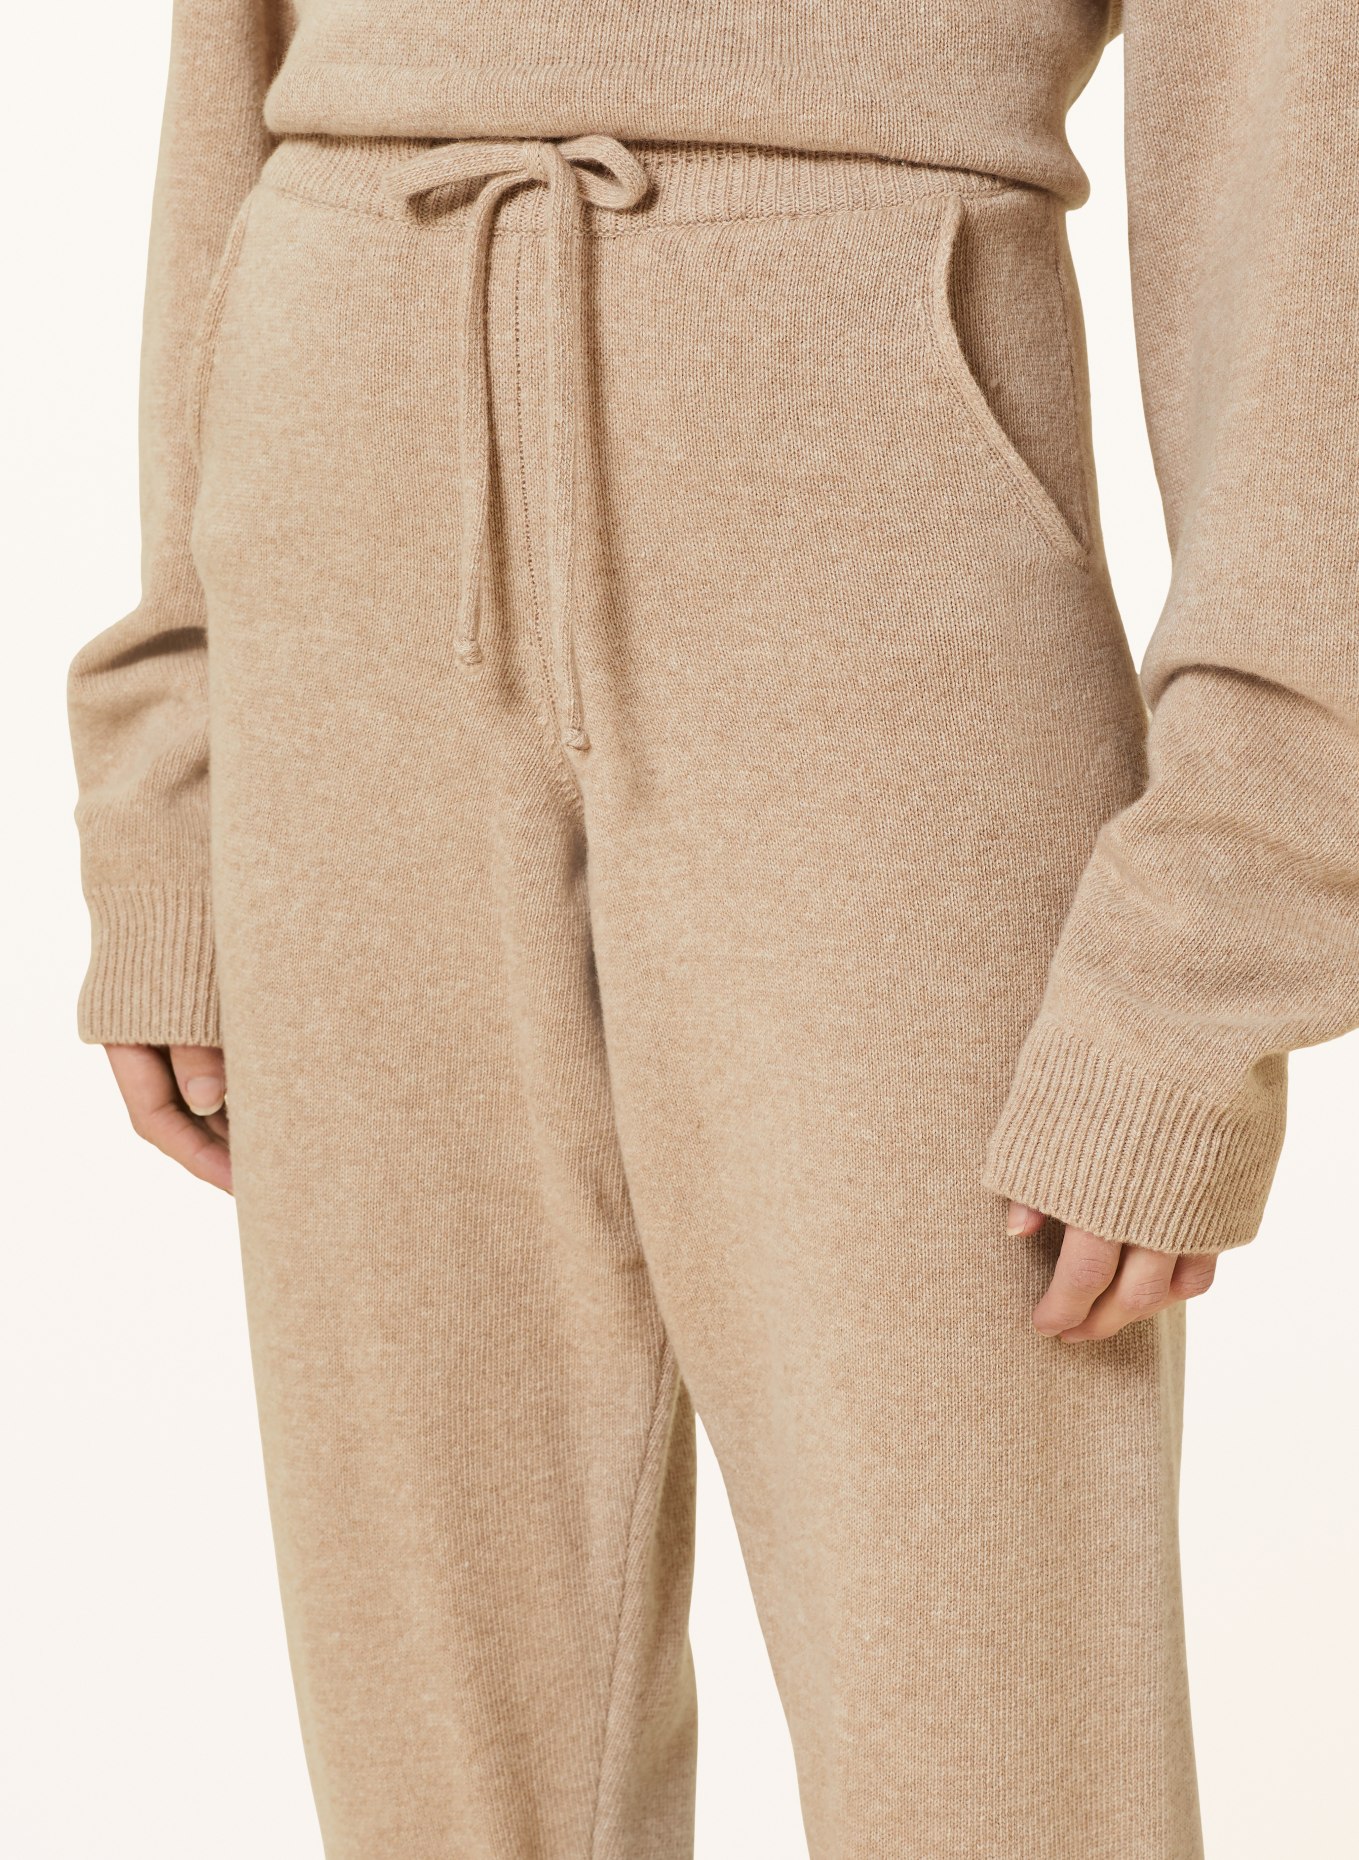 by Aylin Koenig Knit trousers JULES in jogger style made of merino wool, Color: BEIGE (Image 5)